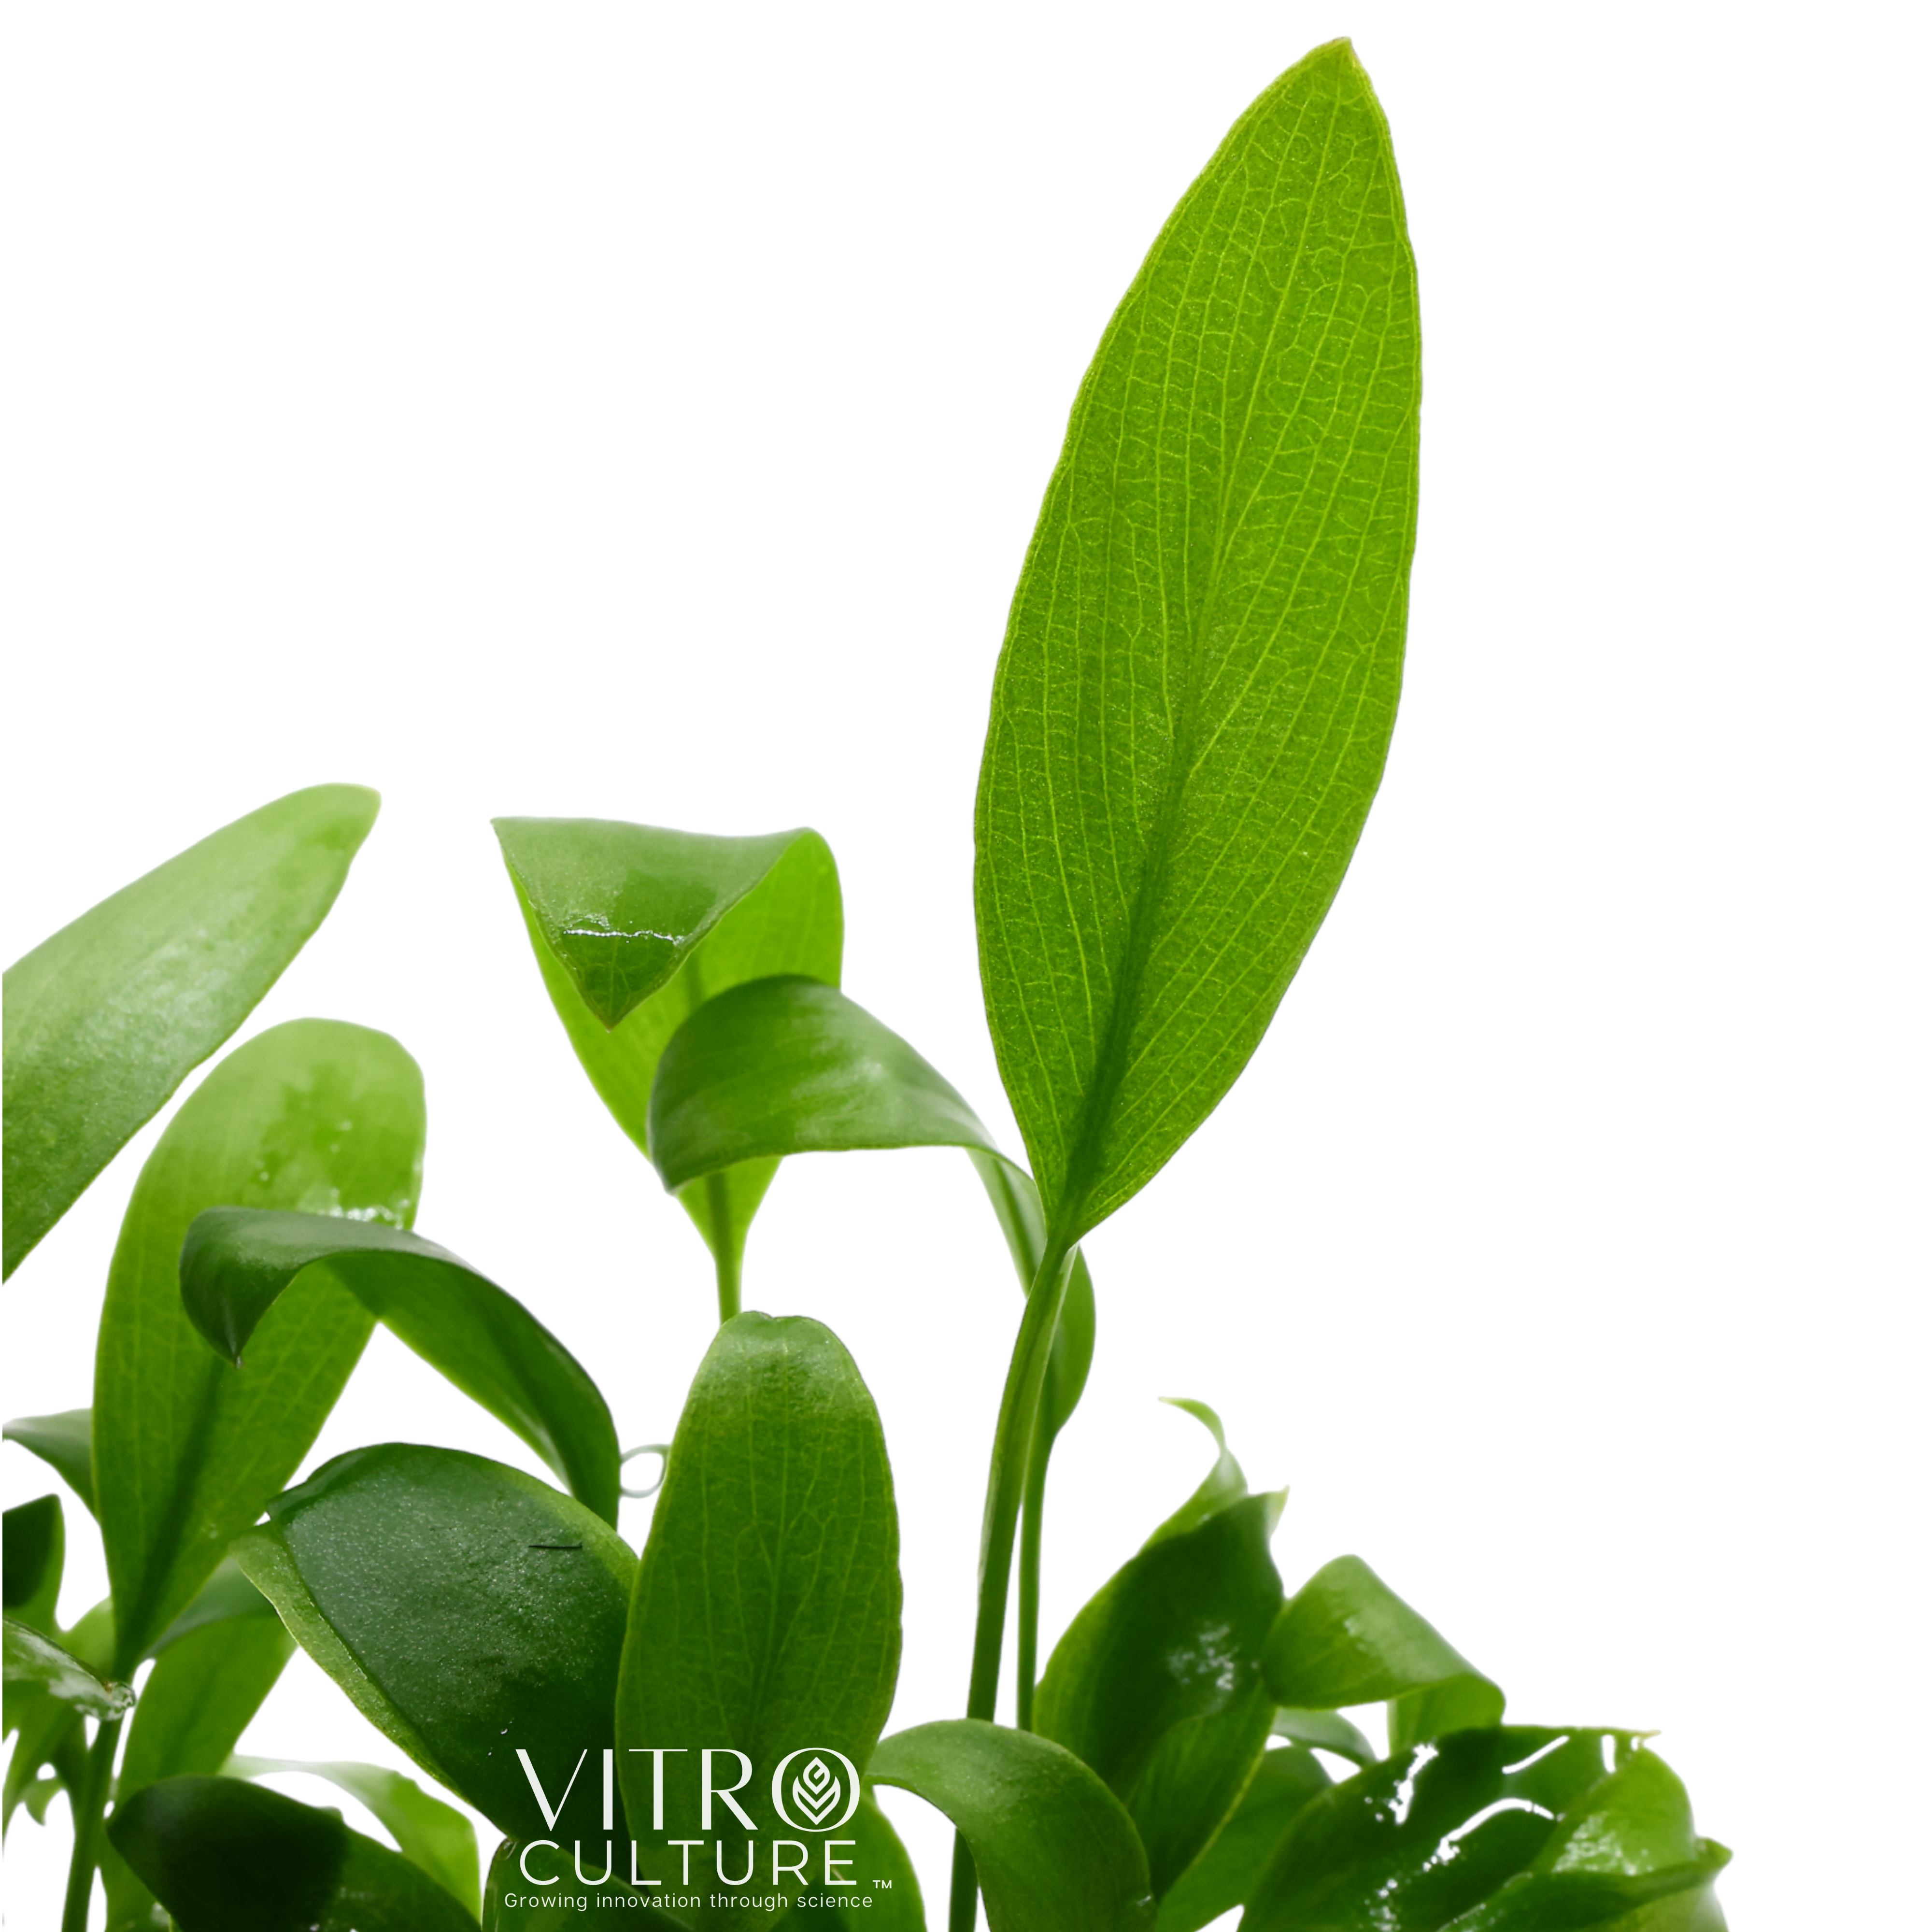 Anubias Striped is characterized by its attractive leaves which can vary in color from light green to dark green depending on the lighting conditions. The plant is very hardy and can tolerate a wide range of water conditions, including low light and low CO2 levels.